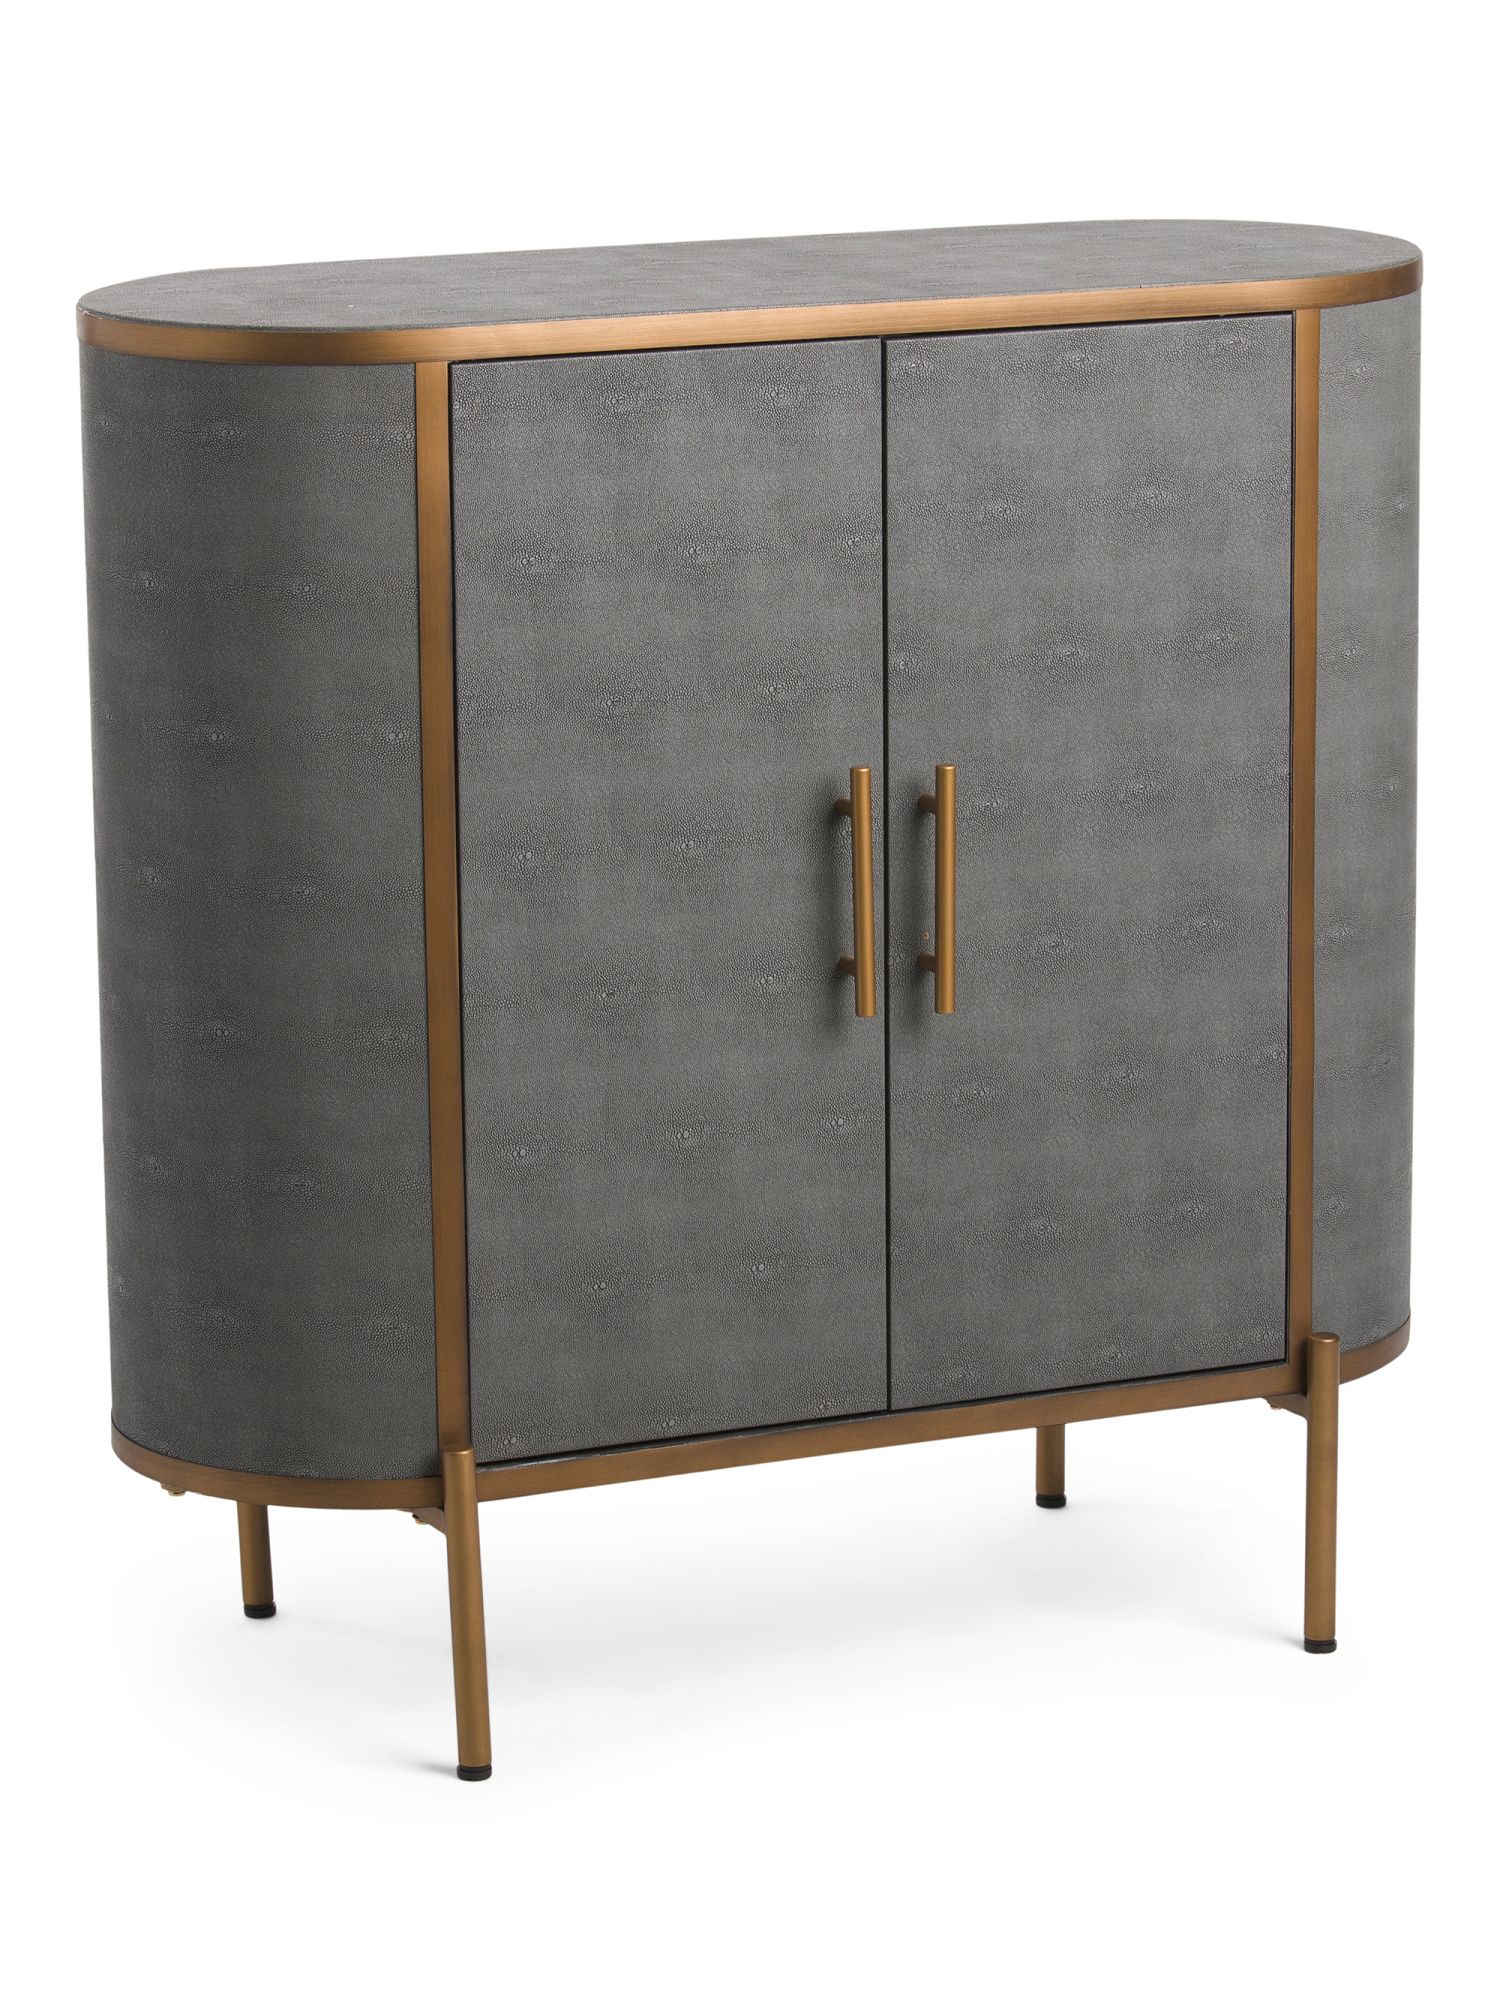 2 Door Pill Shape Wooden Cabinet With Shagreen Leather | TJ Maxx